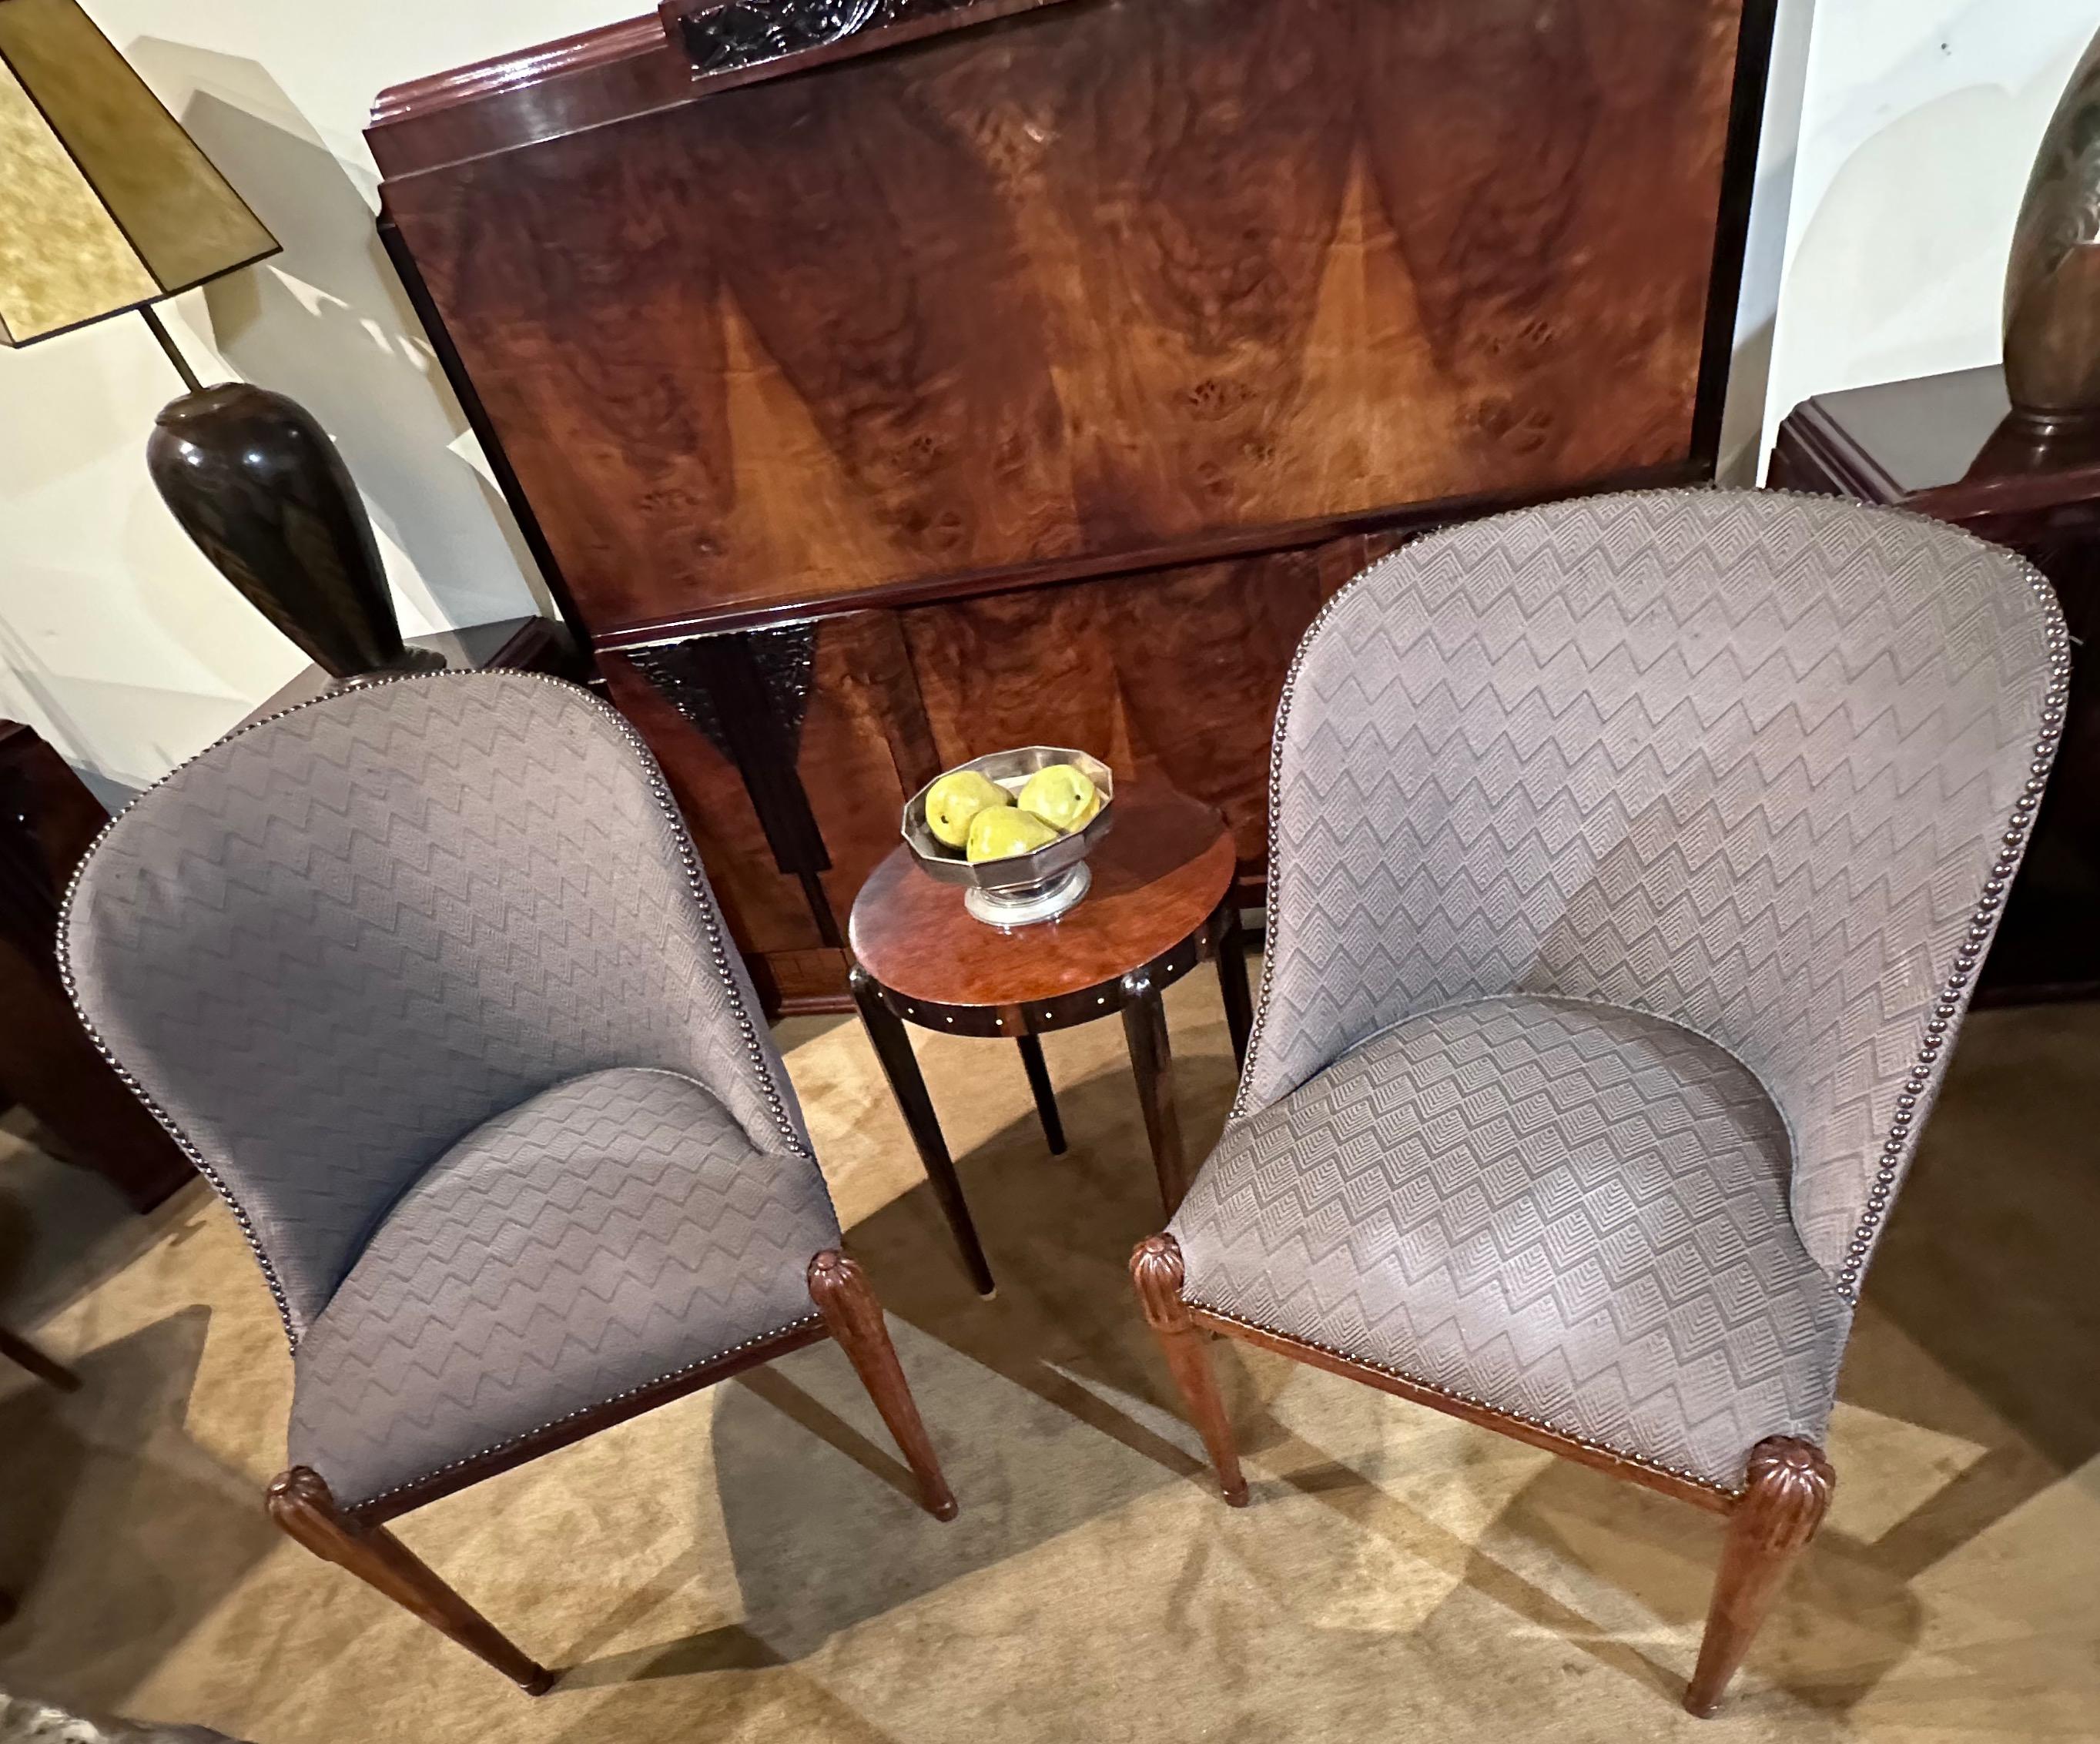 Art Deco Side Chairs Original Fabric and in excellent condition. It is not often we can utilize the original fabric. This wonderful pair of side chairs arrived but needed to be restored on the inside. We carefully removed the French nails and had